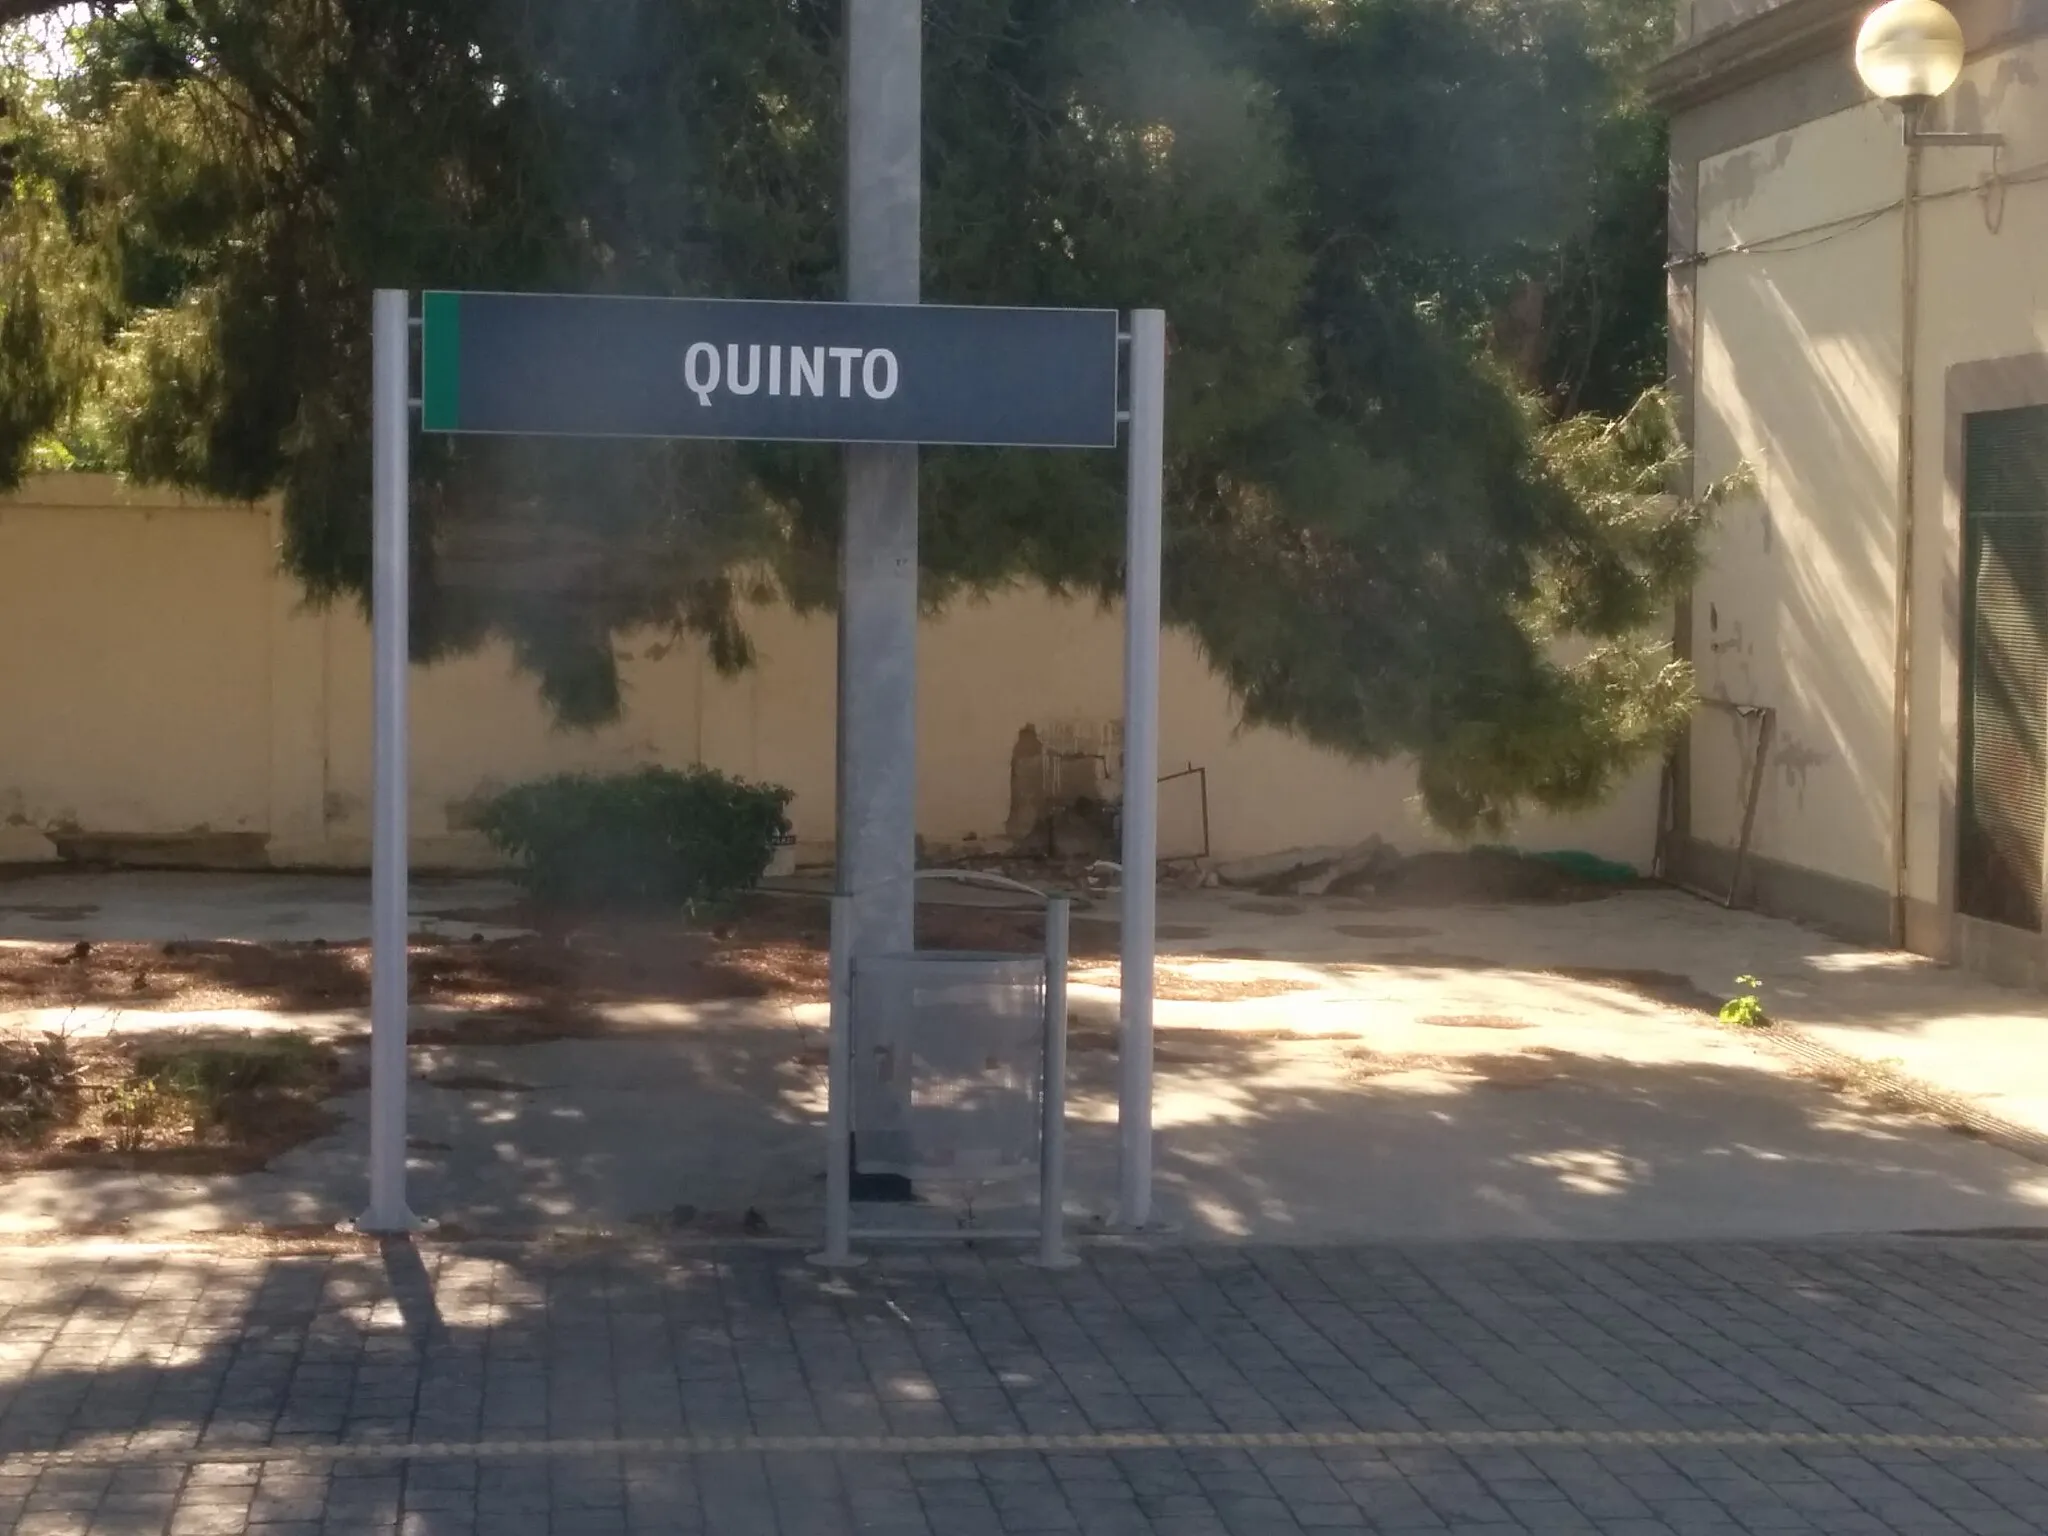 Photo showing: Quinto railway station. Quinto is a village and municipality in the province of Zaragoza, Aragon. It is located on the south bank of the River Ebro about 45 km south-east of Zaragoza